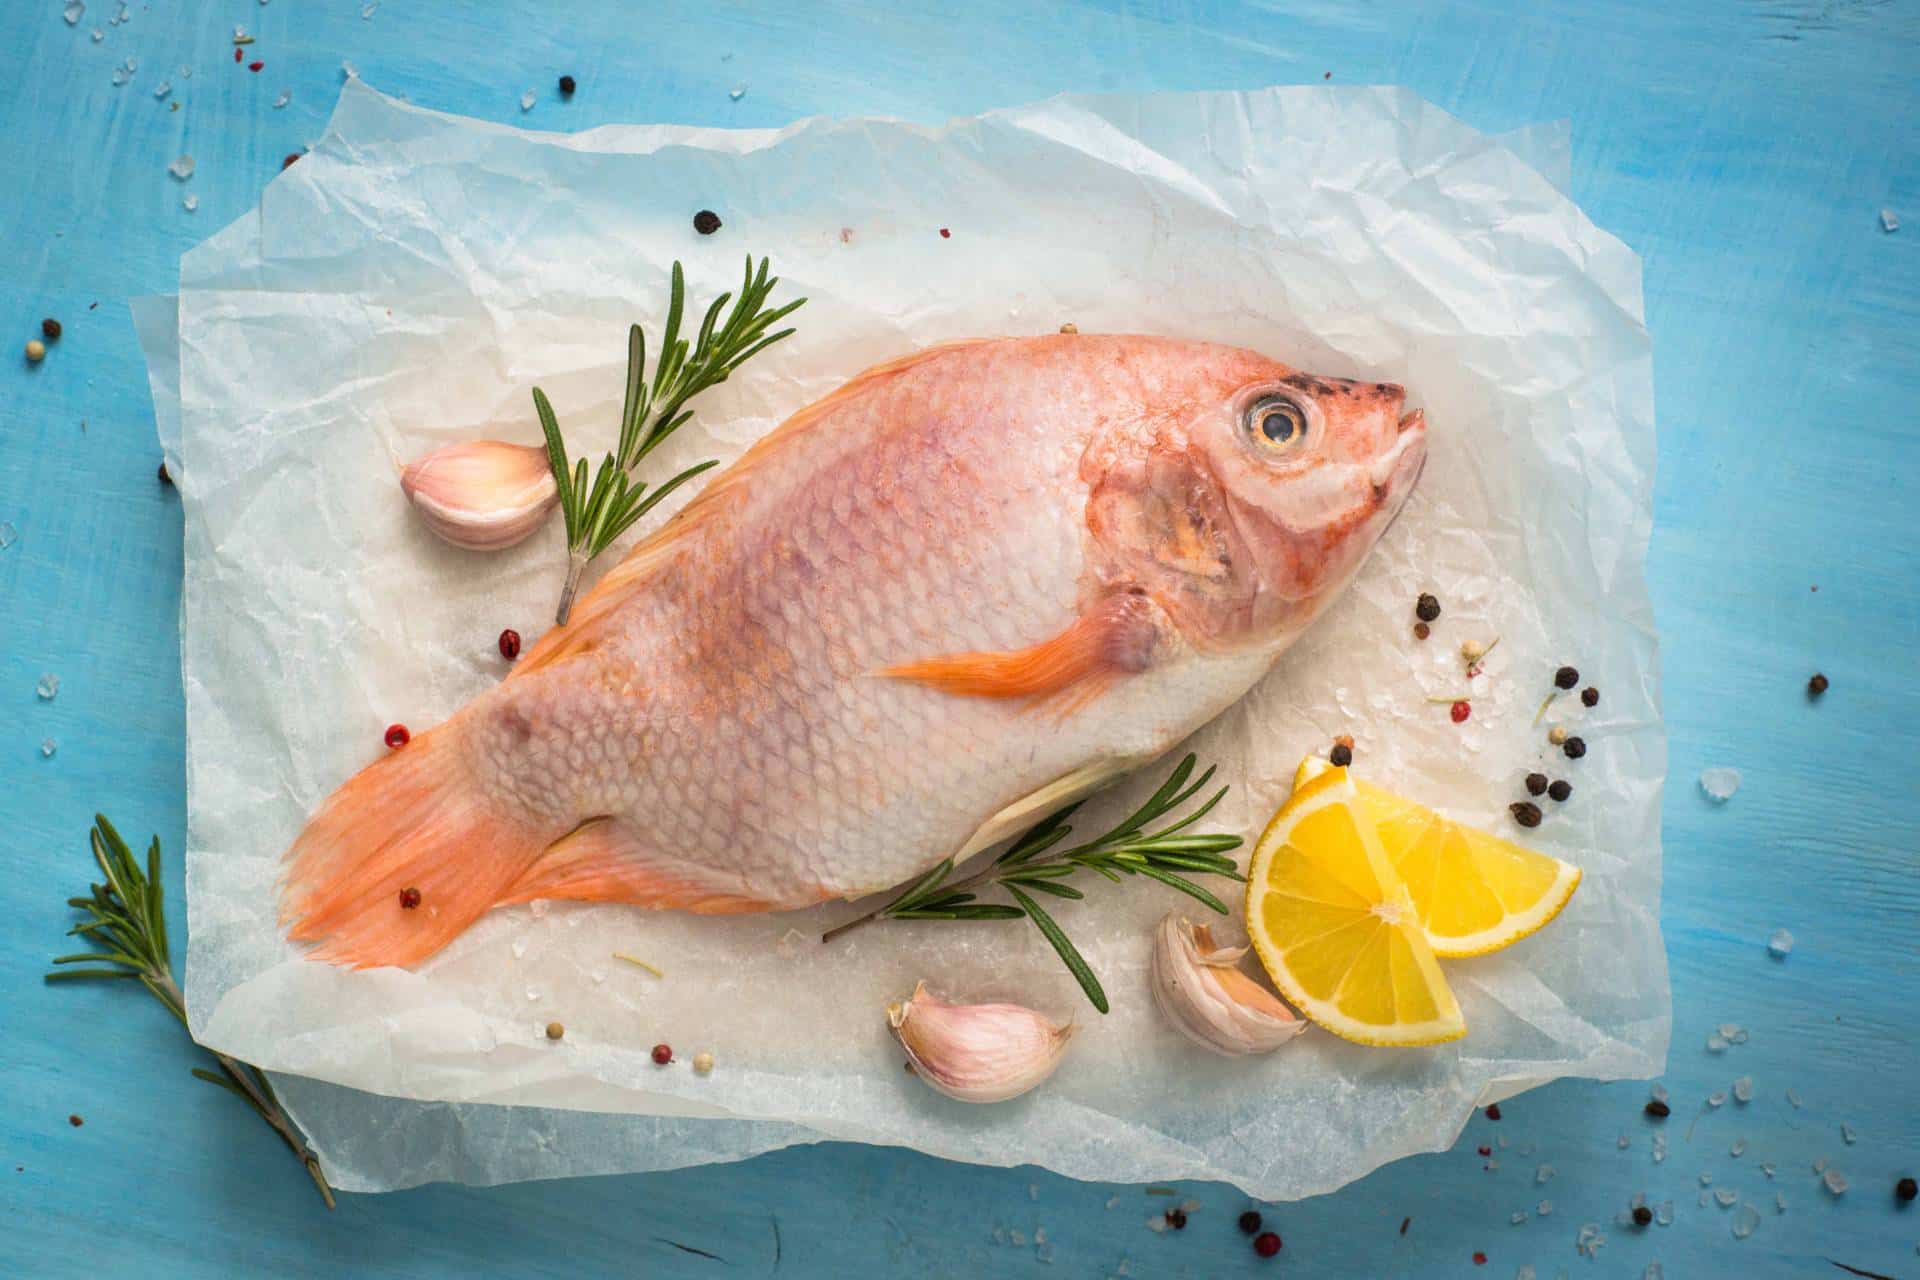 Fish and seafood from A to Z: Tilapia - Fish and health